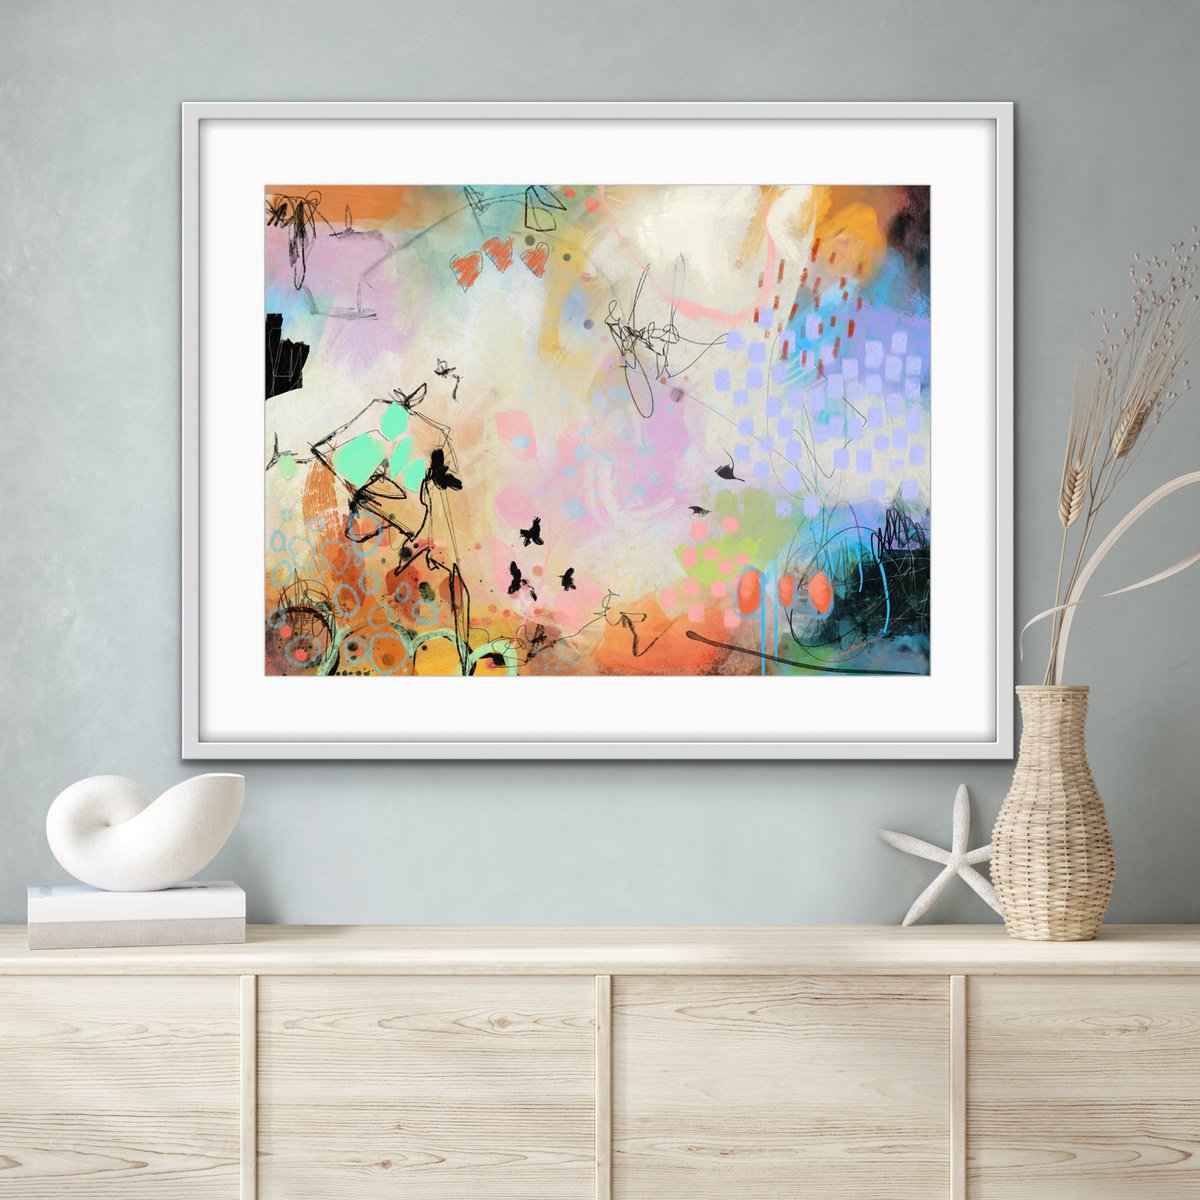 Y’a de l’amour dans l’air - Abstract artwork - Limited edition of 5 by Chantal Proulx